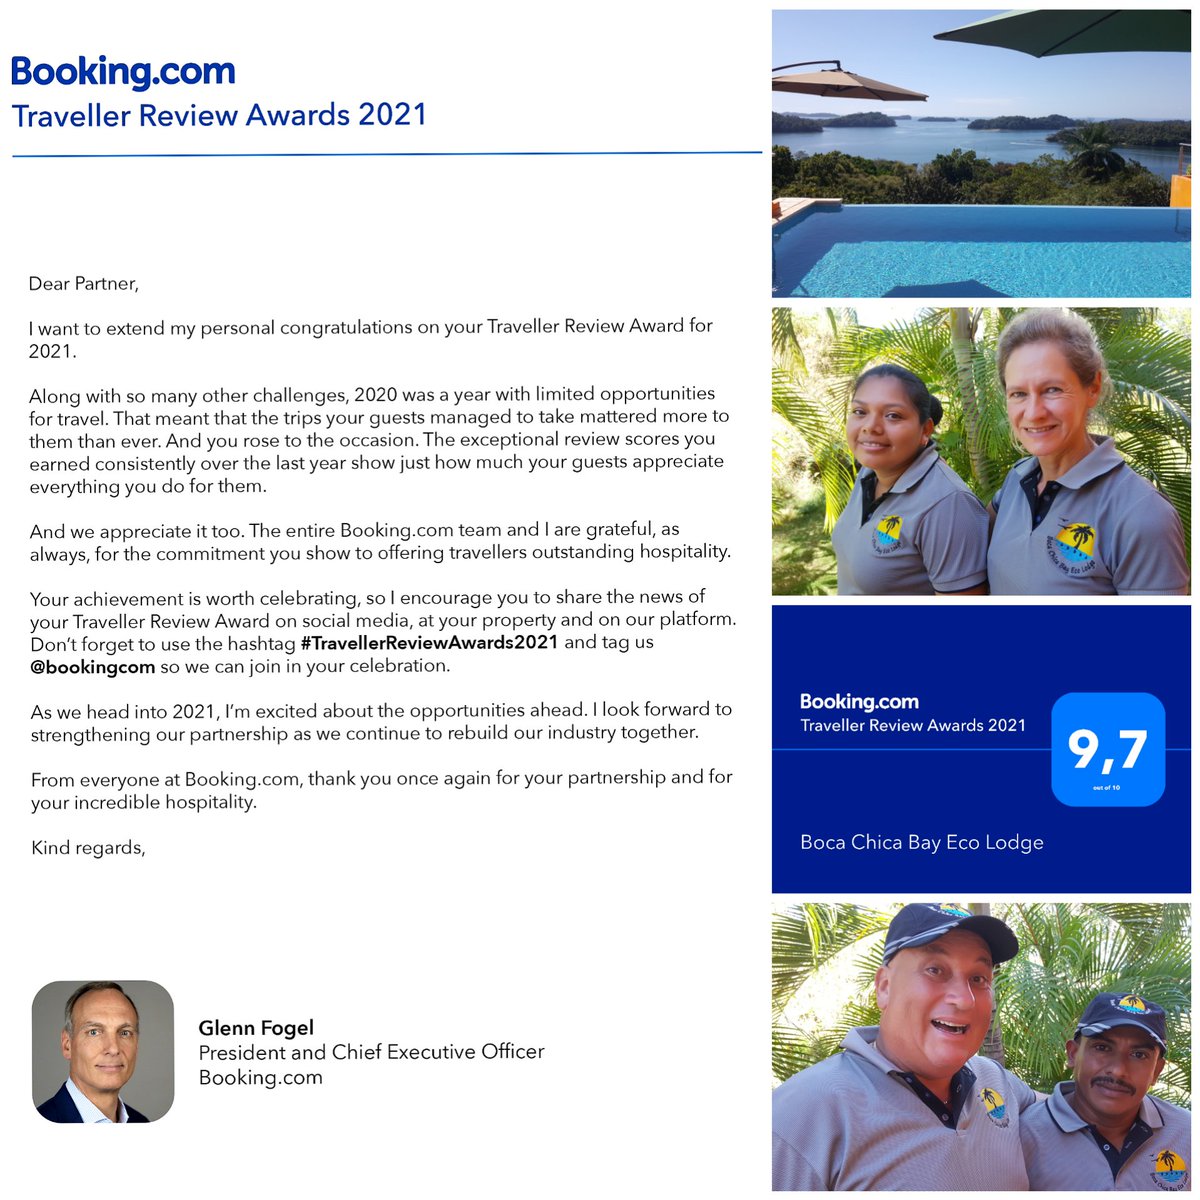 10Years Passionately Hosting 1000s of Guests & a Highest rating of 9.7/165 Reviews @ Boca Chica Bay Eco Lodge 🇵🇦 PANAMA #TravellerReviewAwards2021 @bookingcom #Panama #panamatourism #travelpanama #discoverpanama #lonelyplanet #atppanama #covid19 #escape #paradise #pacificislands